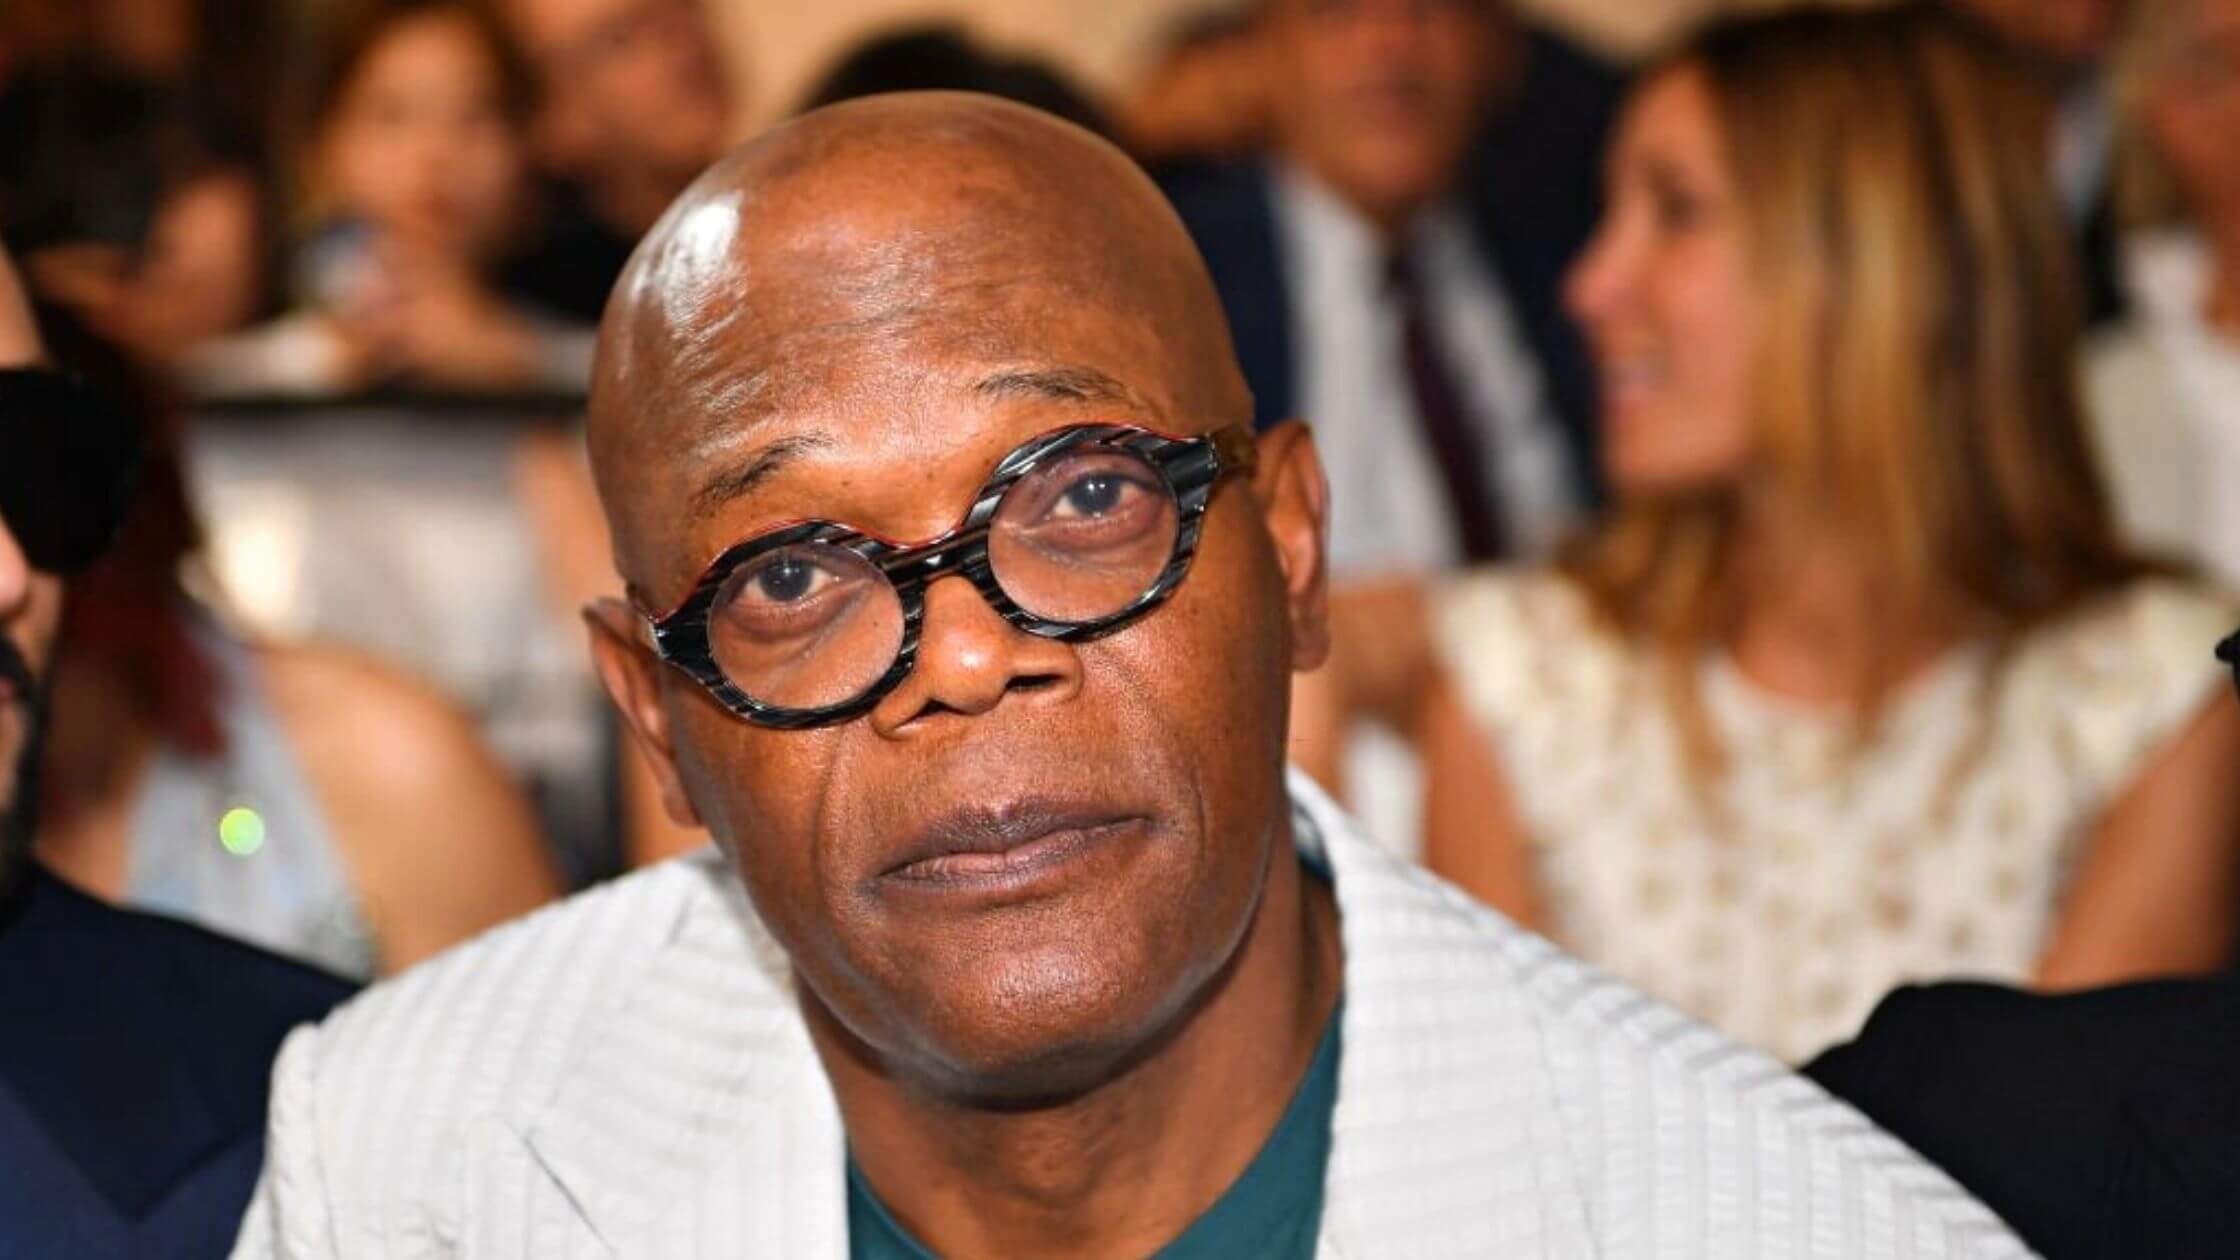 Samuel-L.-Jackson-Bio-Net-Worth-Movies-Age-Career-Personal-Life-Height-Weight-And-More-1